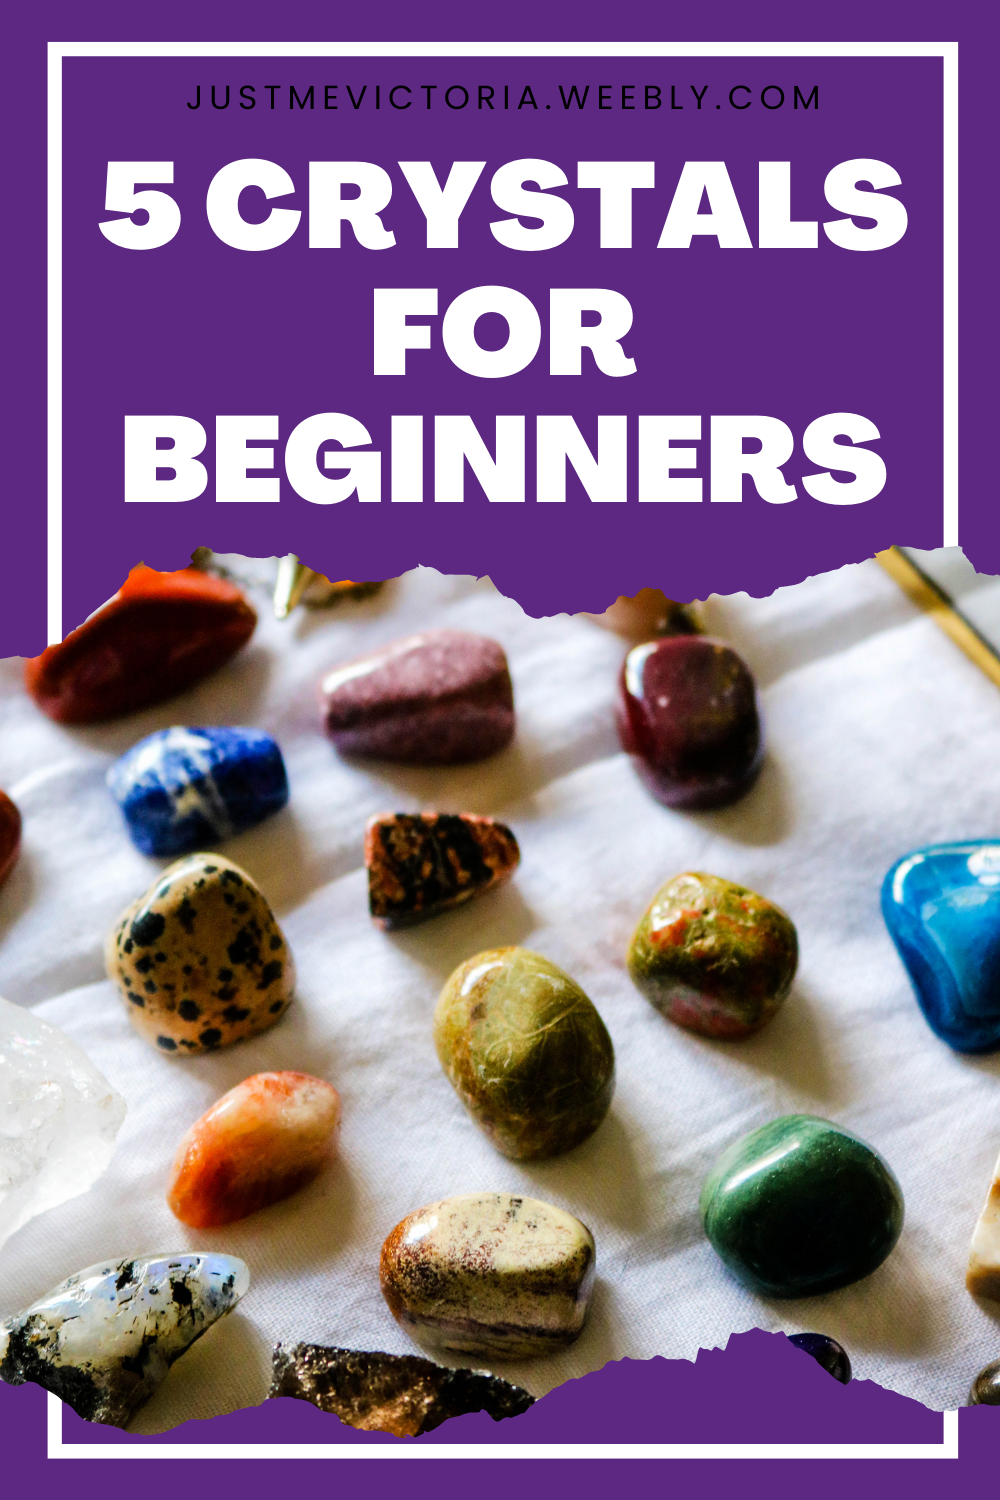 5 Crystals For Beginners - Just Me, Victoria